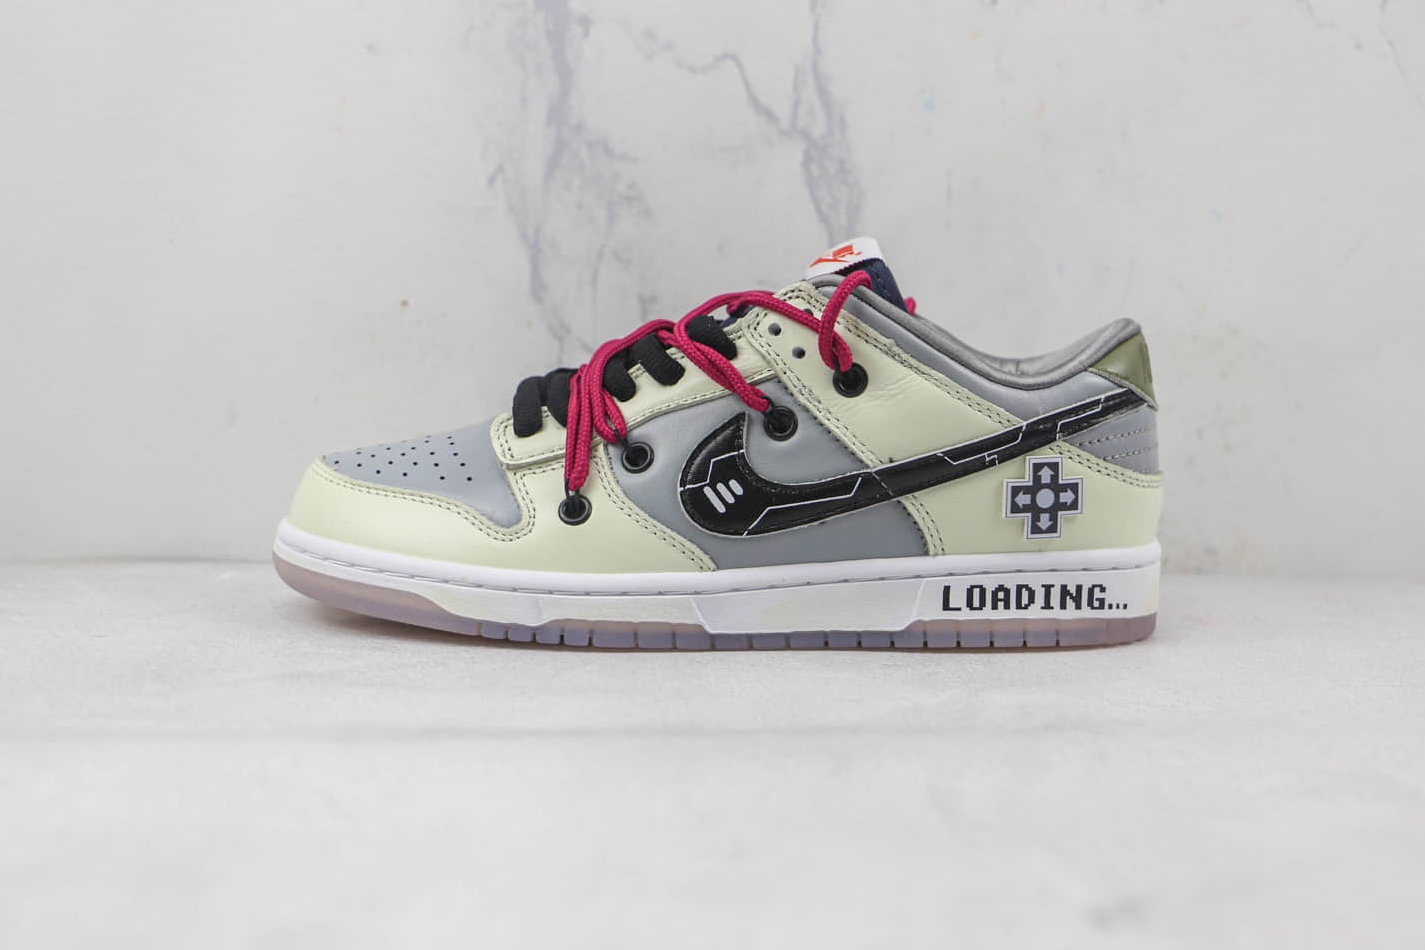 NIKE Dunk Low "Video Game" Skateboard Shoes - Limited Edition